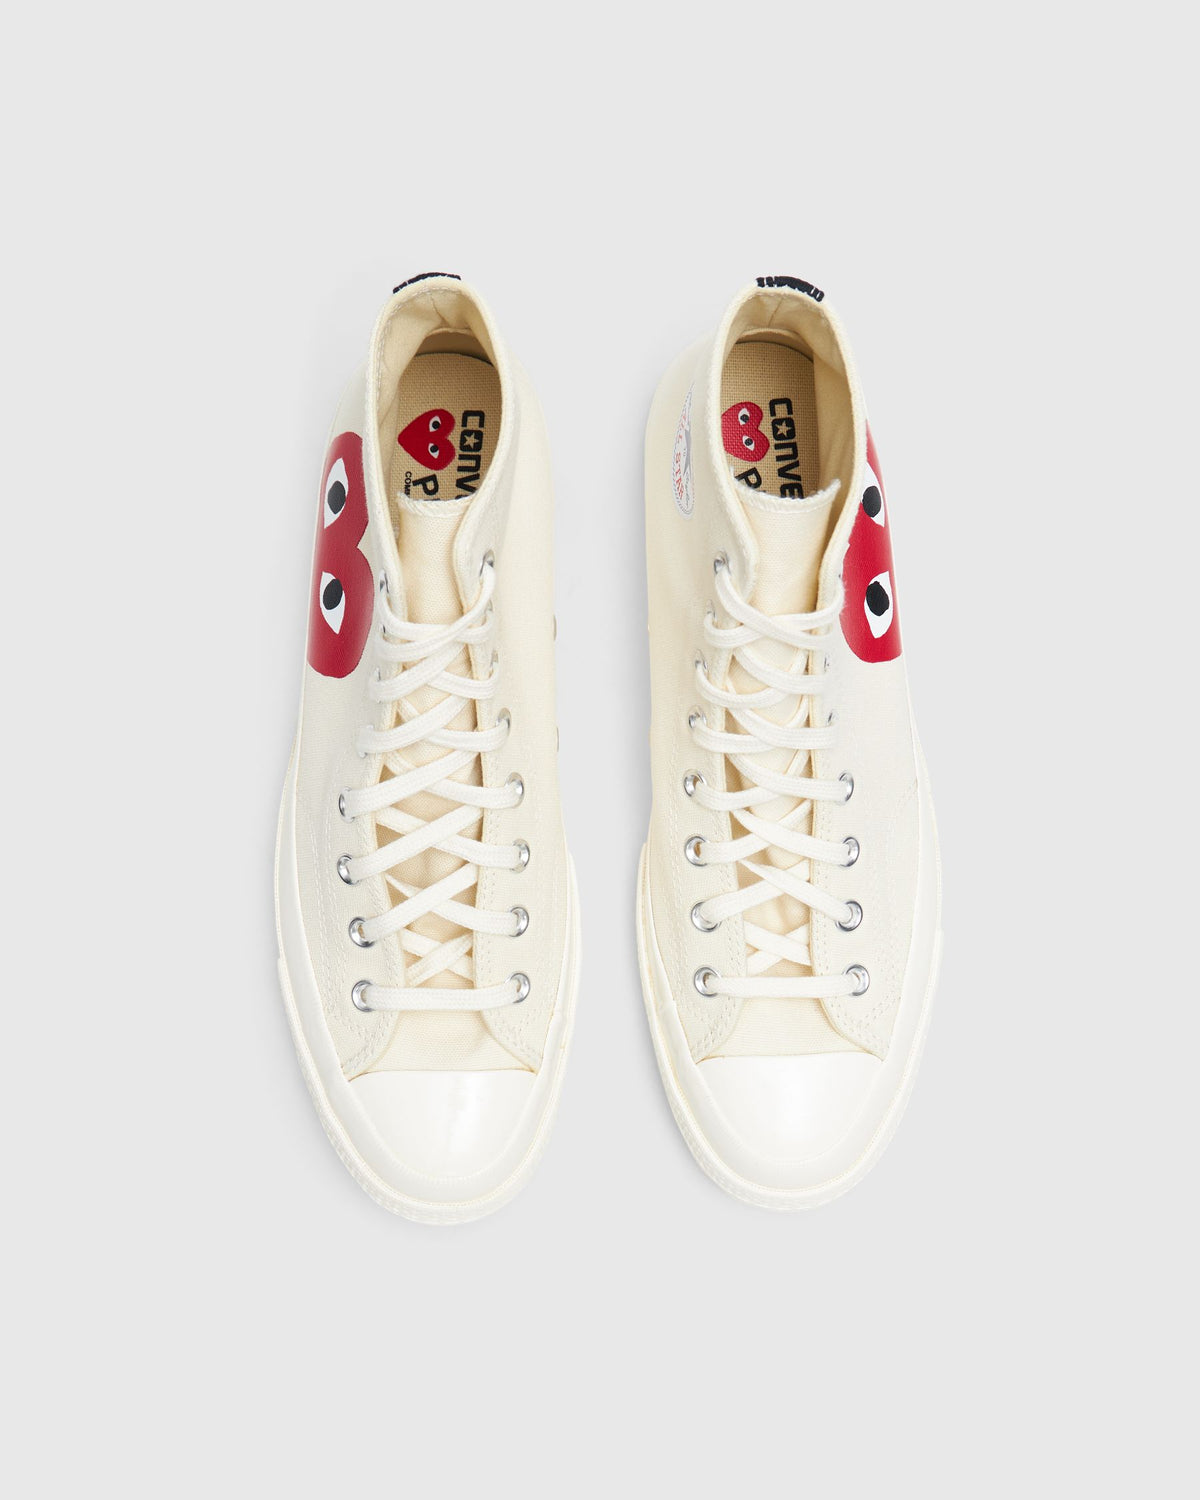 Red Heart Chuck Taylor All Star '70 High in White